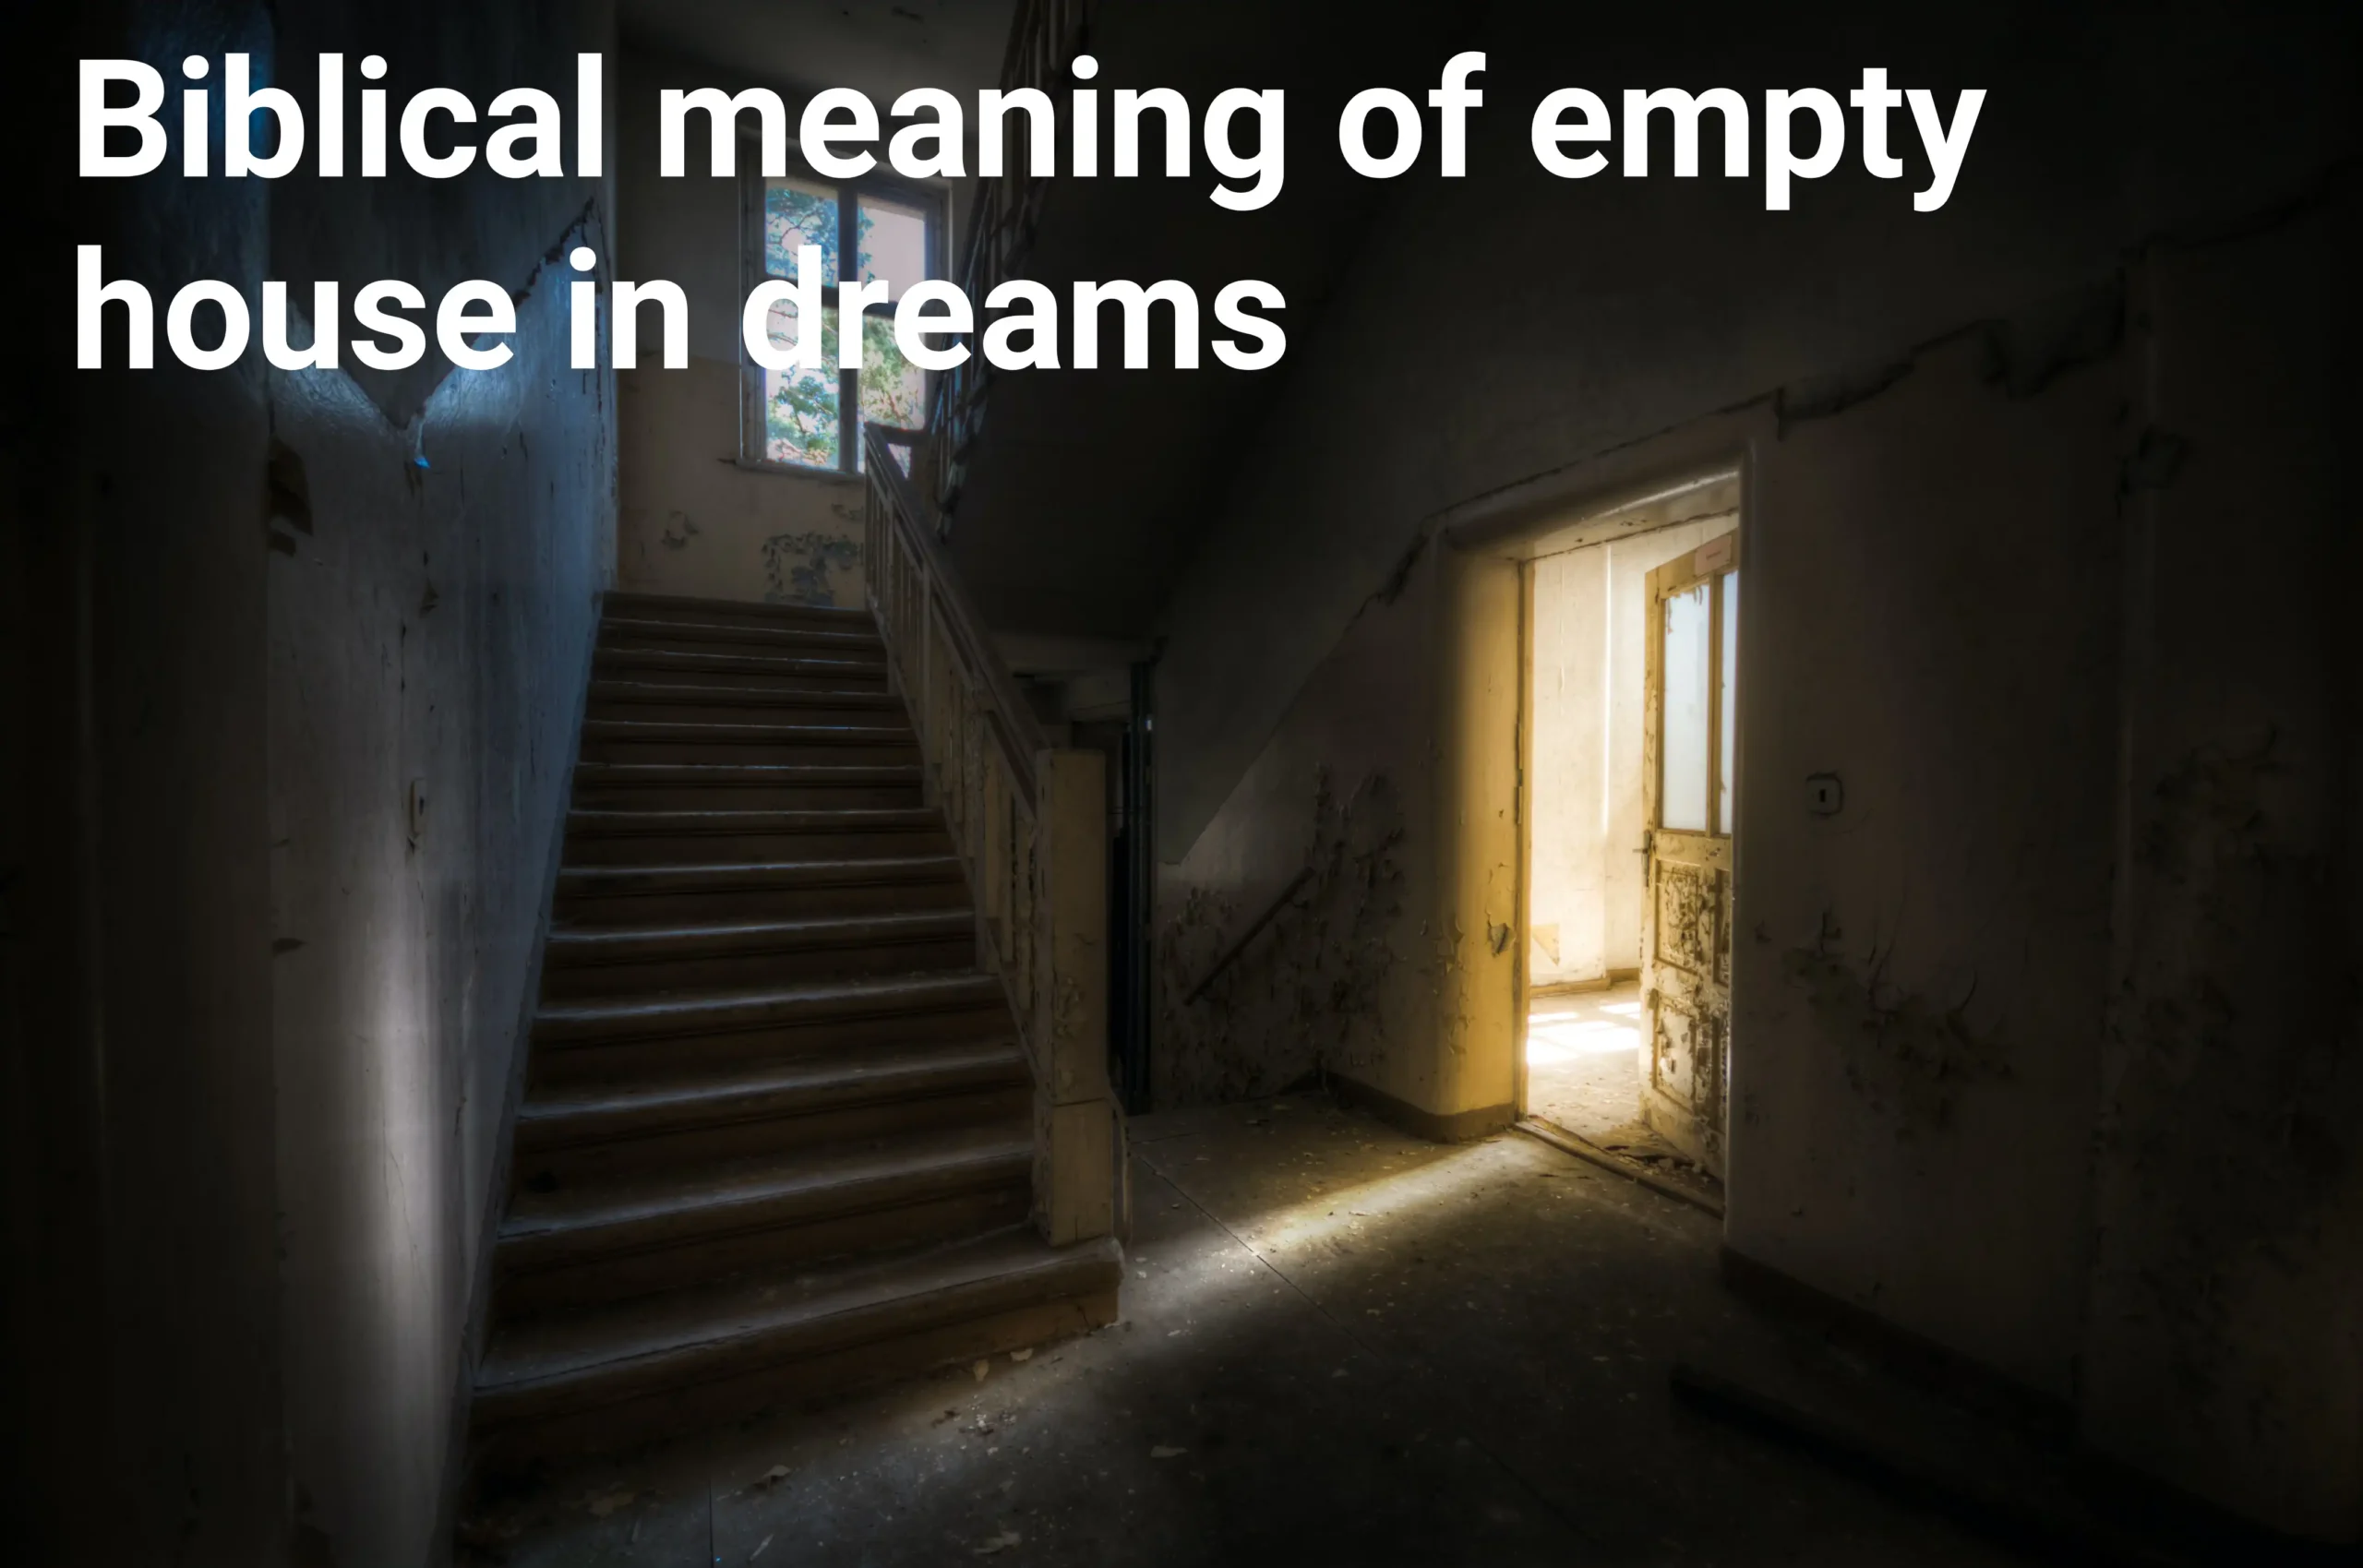 Biblical meaning of empty house in dreams